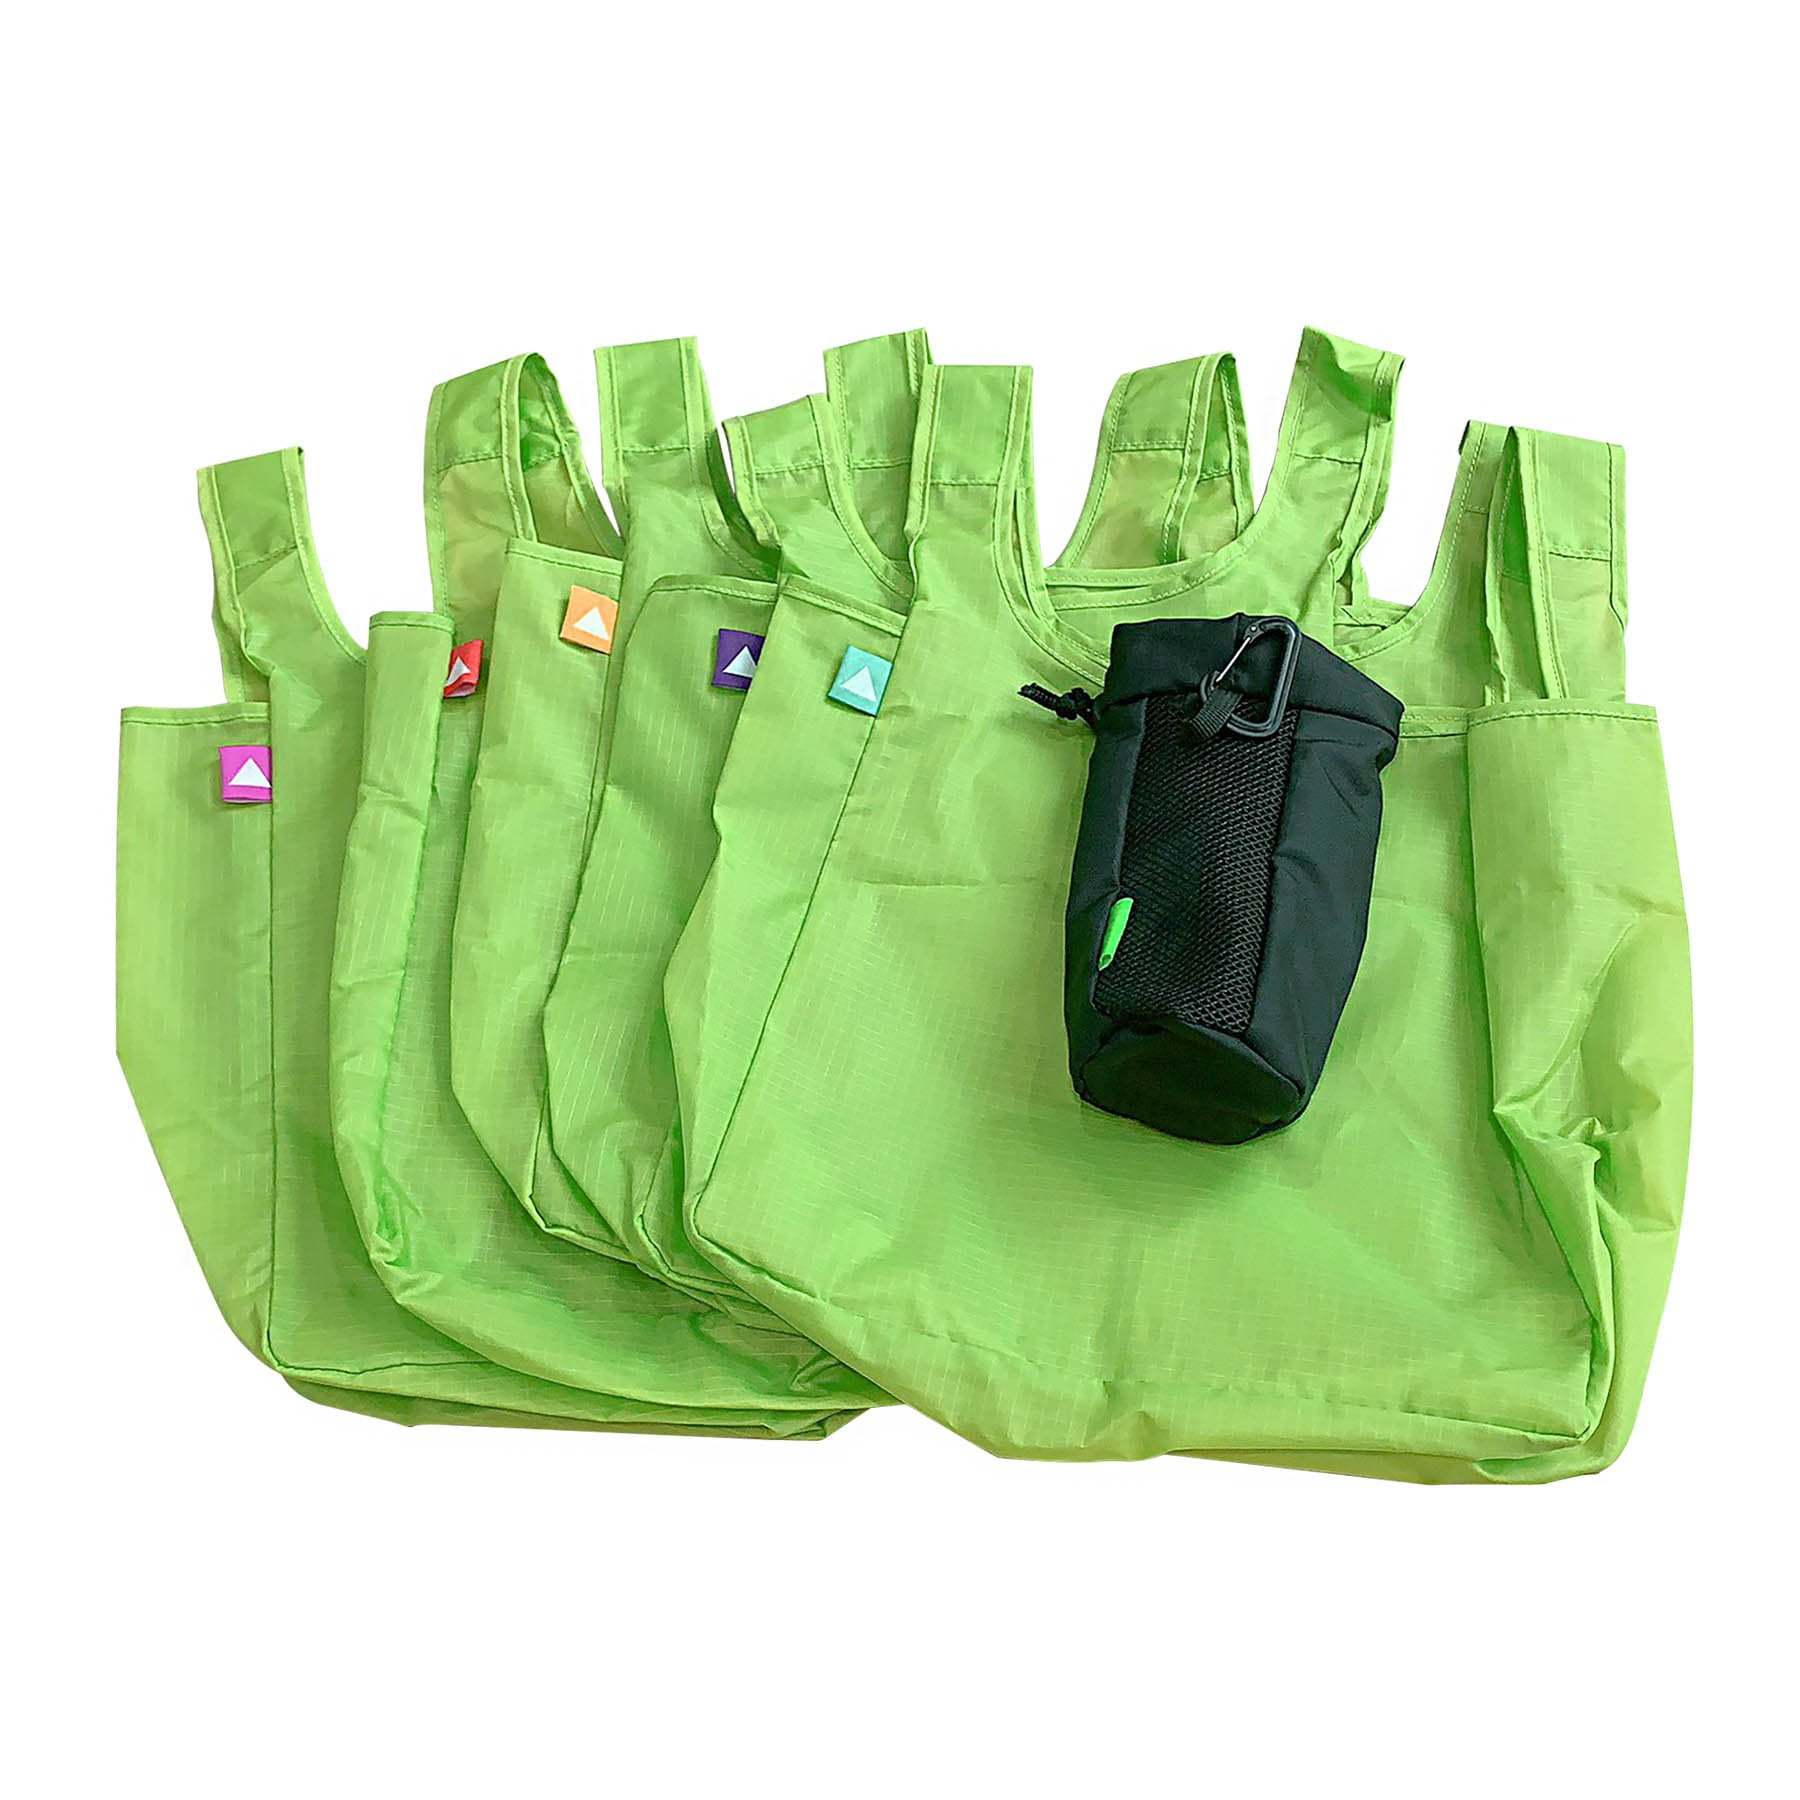 5ct Zenpac- Green Ripstop Nylon Grocery Bags with Pouch Compact 5 Pack